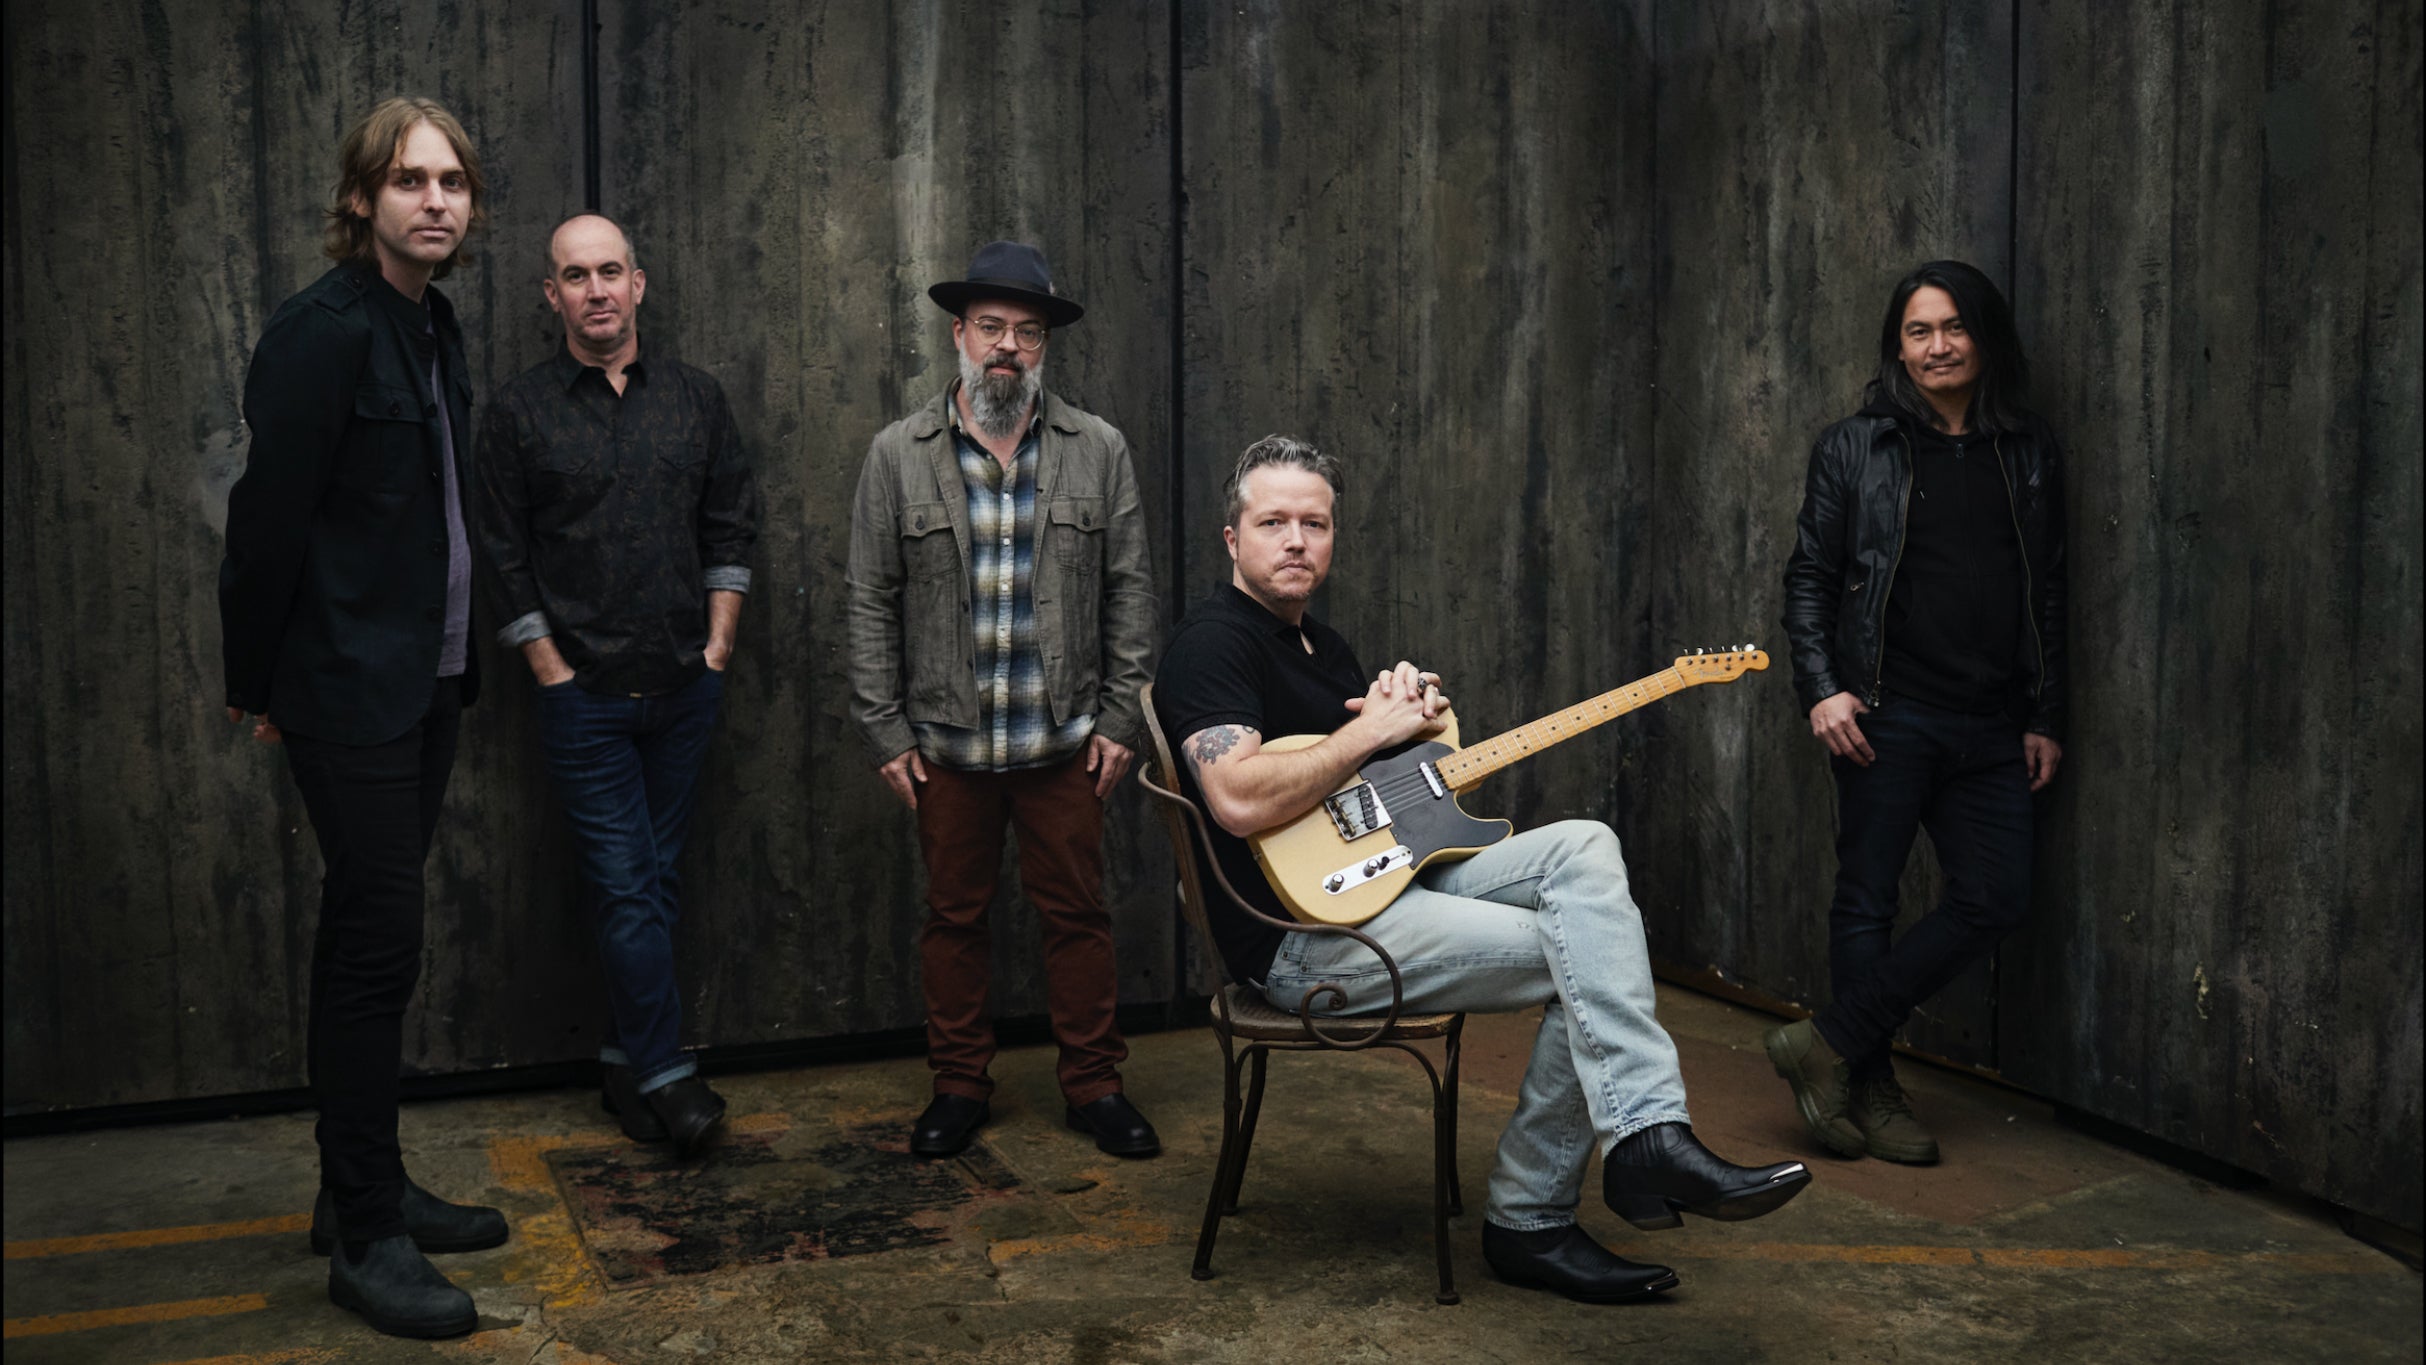 WXPN Welcomes Jason Isbell and the 400 Unit free pre-sale passcode for early tickets in Philadelphia